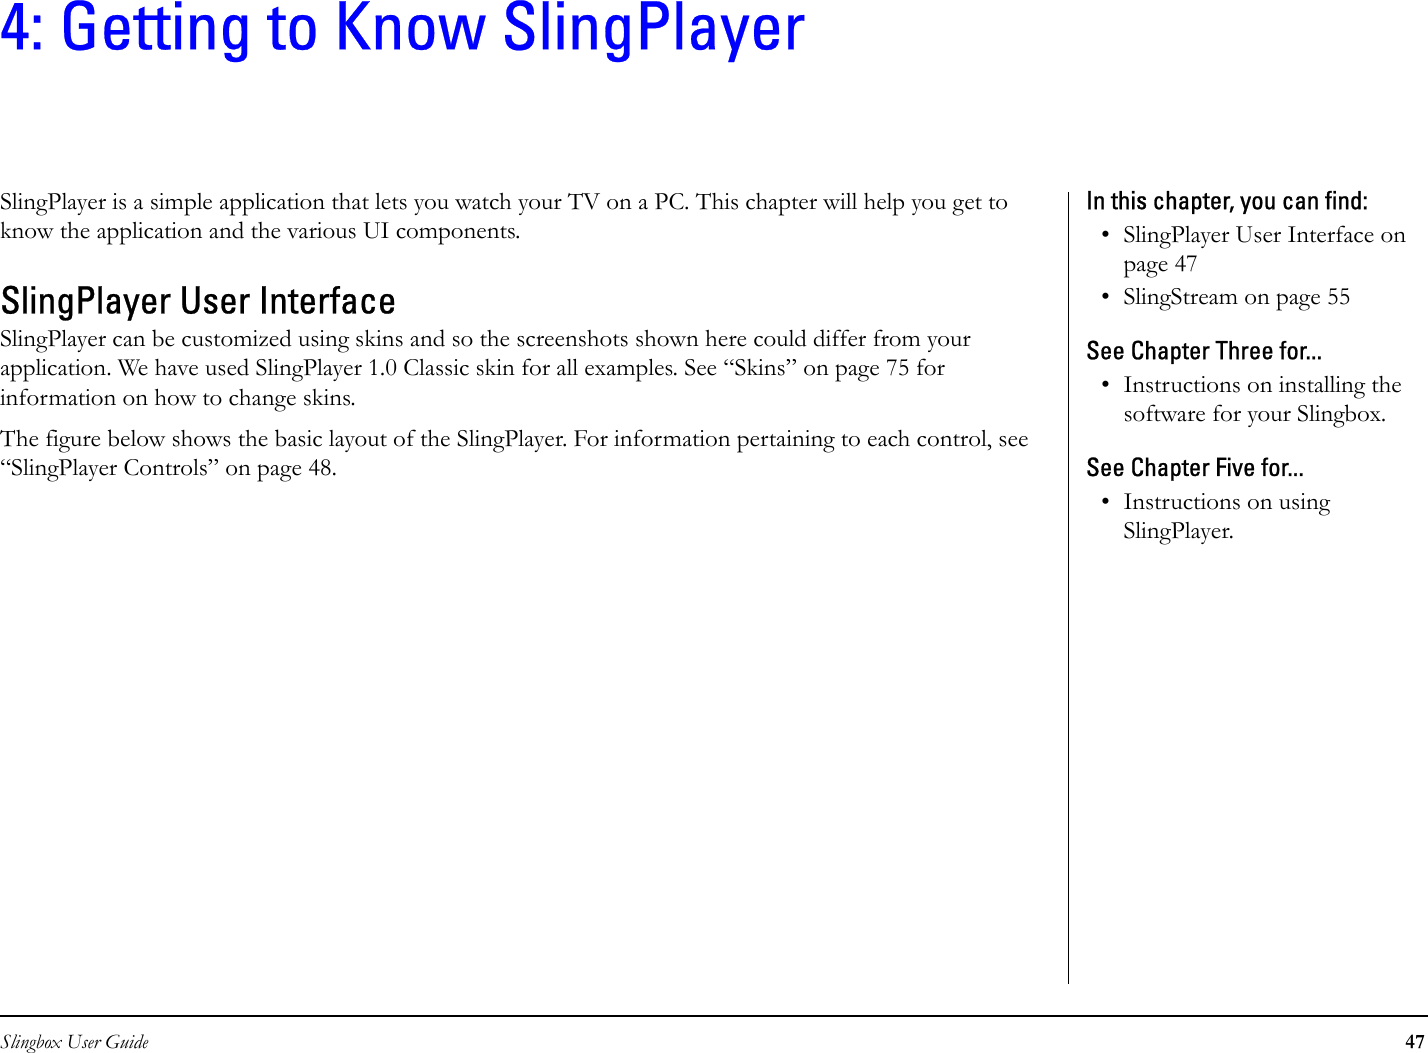 Slingbox User Guide 474: Getting to Know SlingPlayerSlingPlayer is a simple application that lets you watch your TV on a PC. This chapter will help you get to know the application and the various UI components. SlingPlayer User InterfaceSlingPlayer can be customized using skins and so the screenshots shown here could differ from your application. We have used SlingPlayer 1.0 Classic skin for all examples. See “Skins” on page 75 for information on how to change skins.The figure below shows the basic layout of the SlingPlayer. For information pertaining to each control, see “SlingPlayer Controls” on page 48.In this chapter, you can find: • SlingPlayer User Interface on page 47• SlingStream on page 55See Chapter Three for...• Instructions on installing the software for your Slingbox.See Chapter Five for...• Instructions on using SlingPlayer.